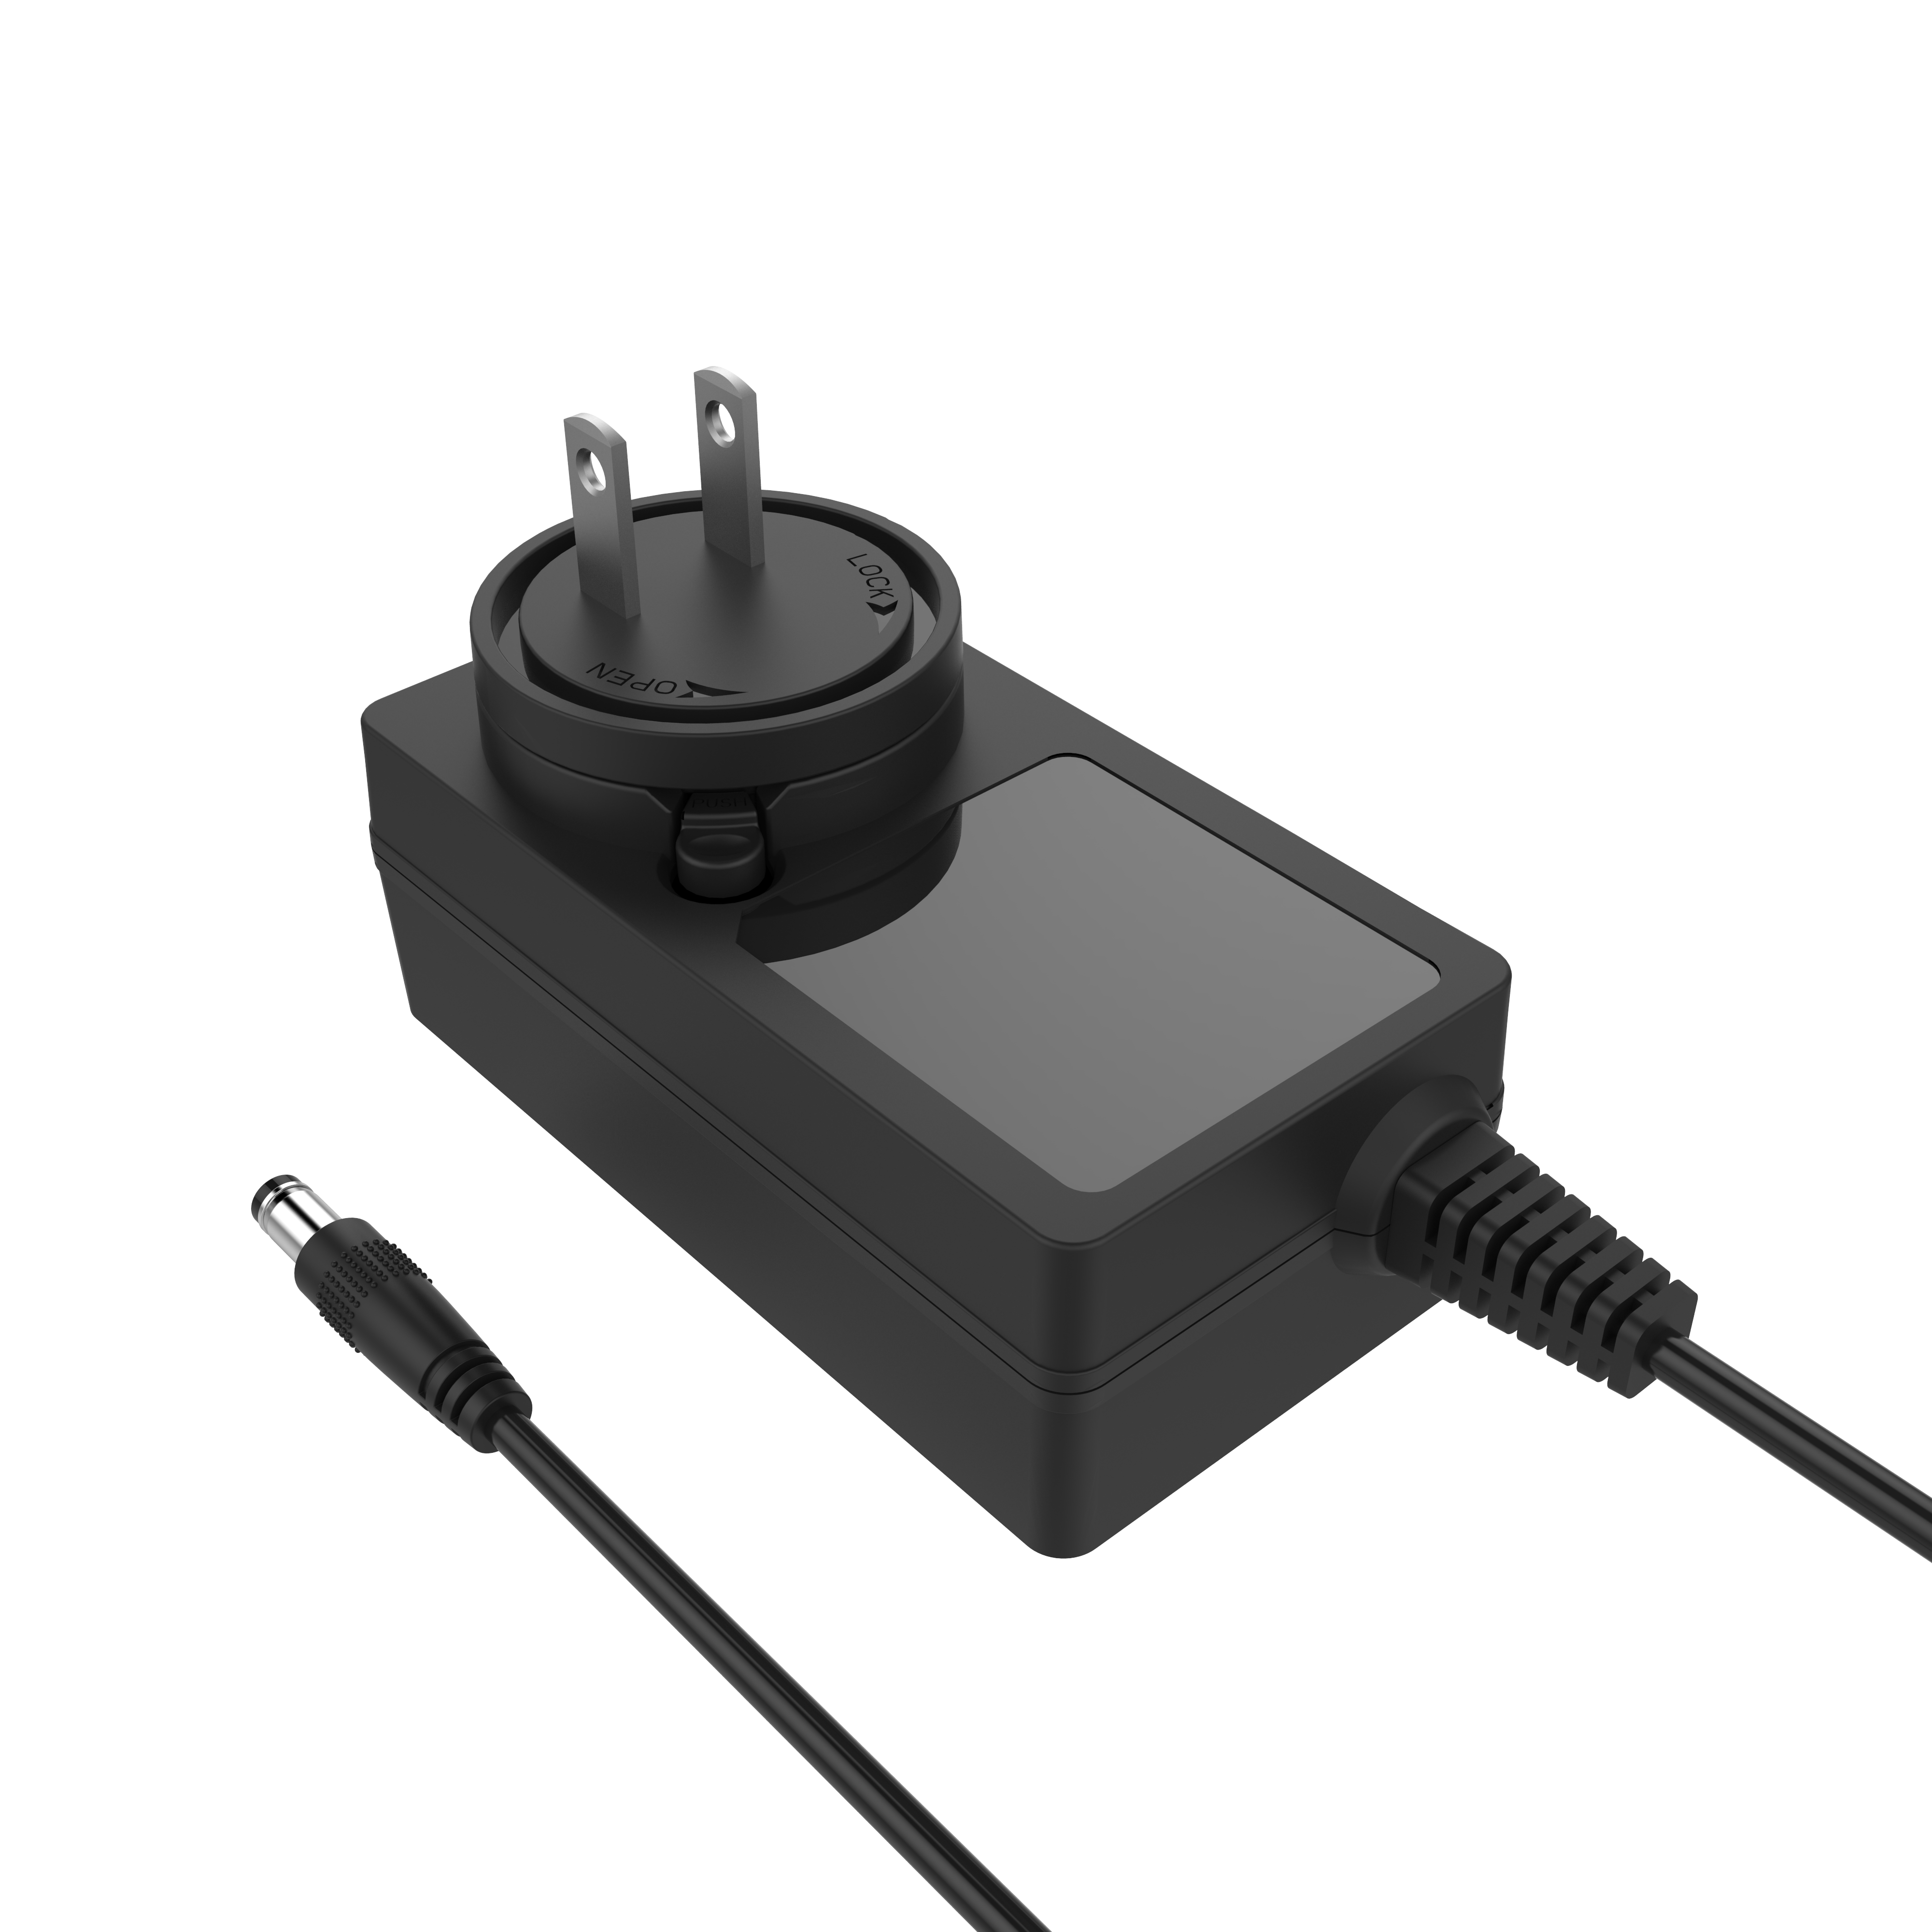 30W 12V 2.5A interchangeable plug power adapter with US/EU/UK/AUS blades for aromatherapy machine